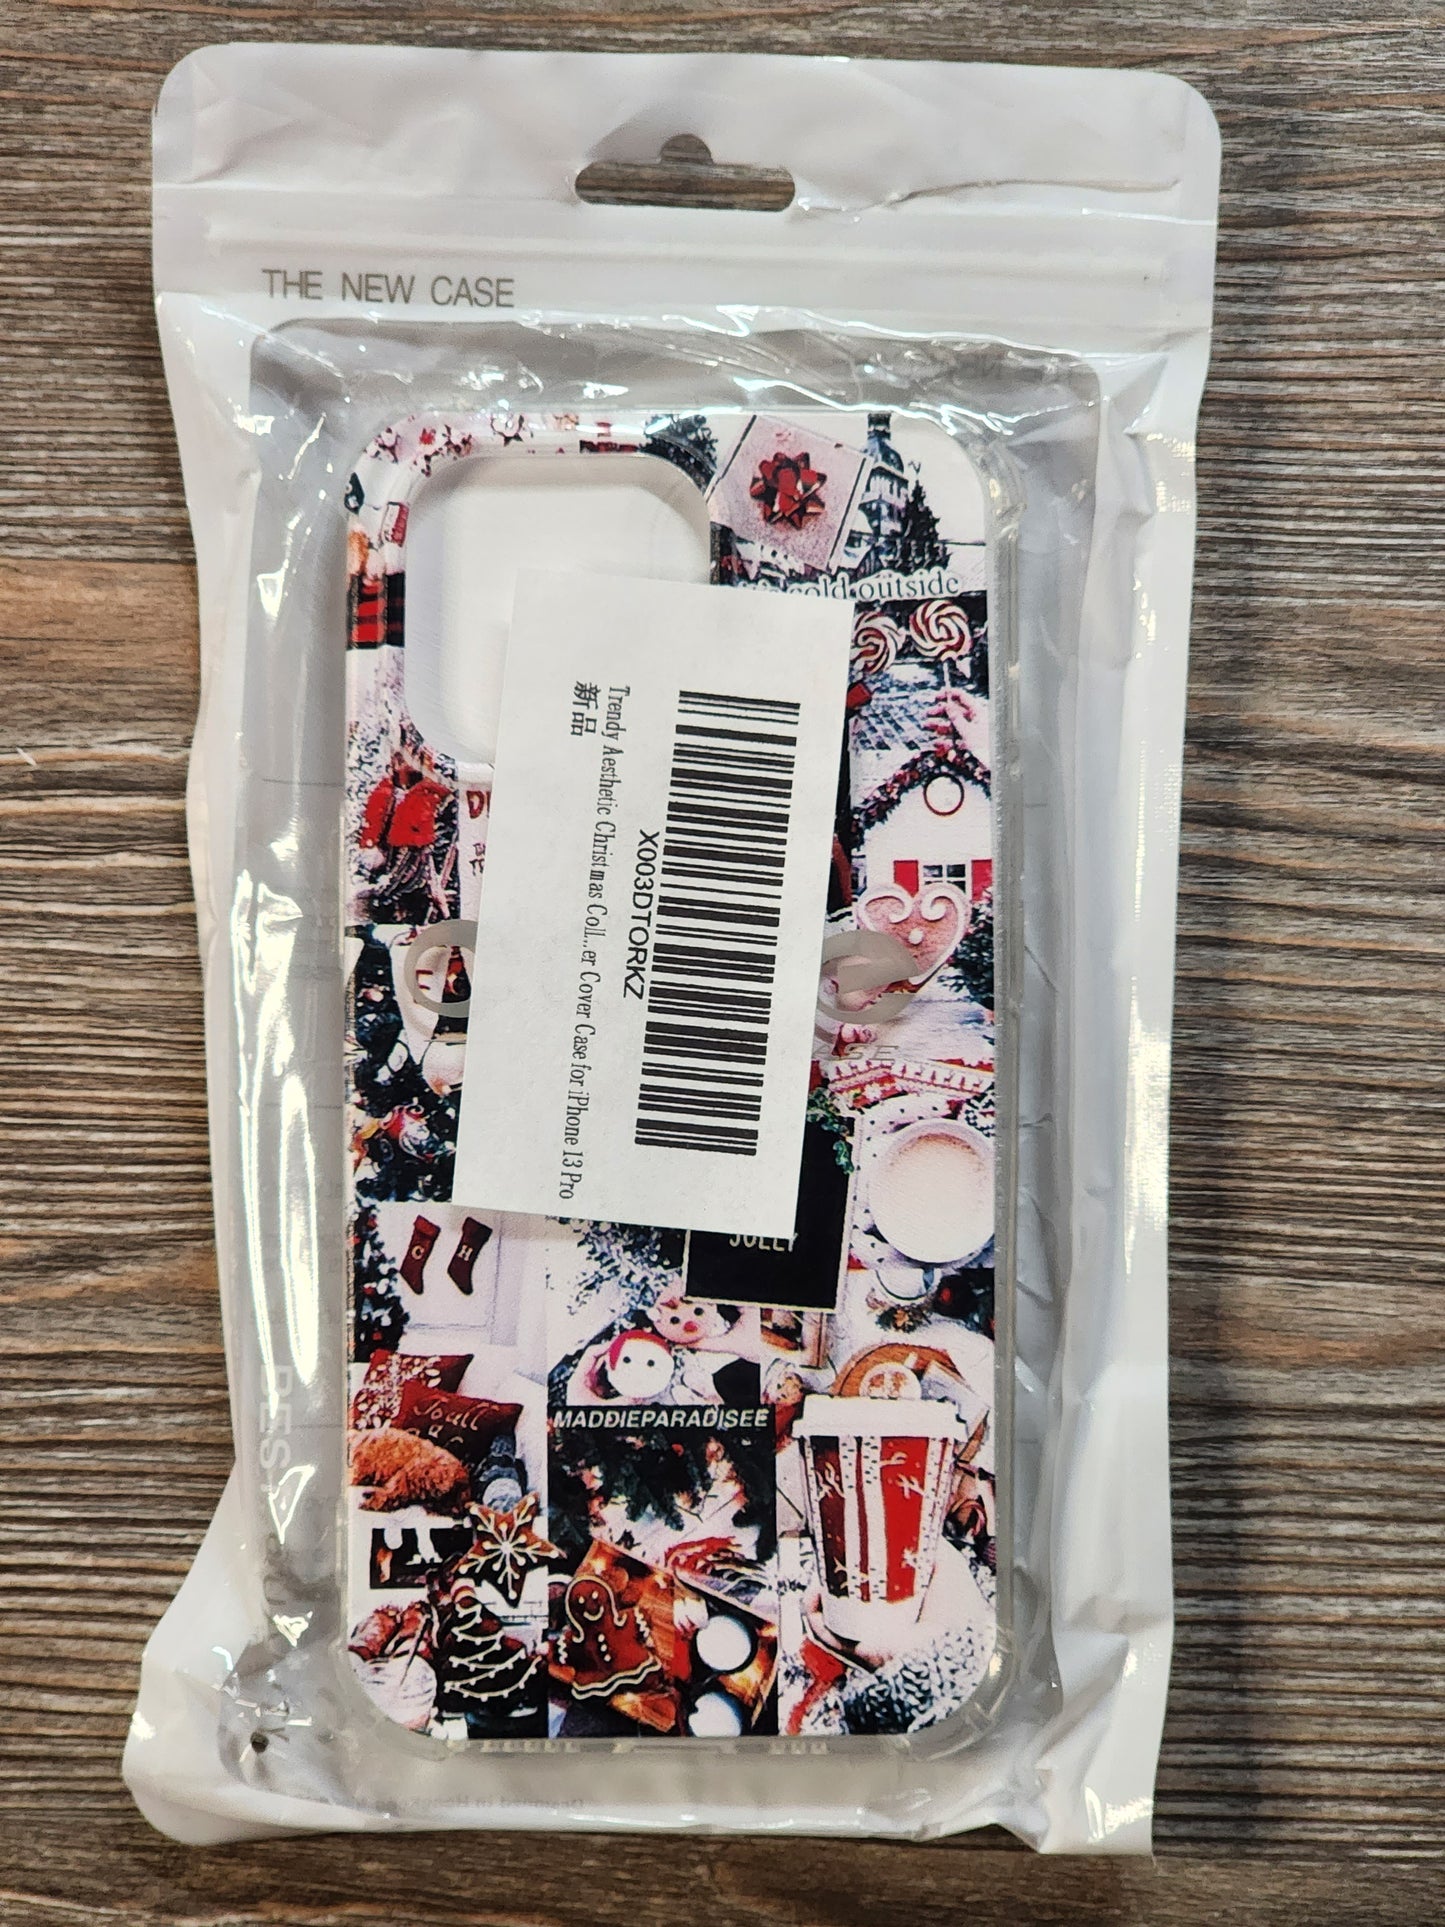 iPhone 13 Pro Christmas Edition Phone Case